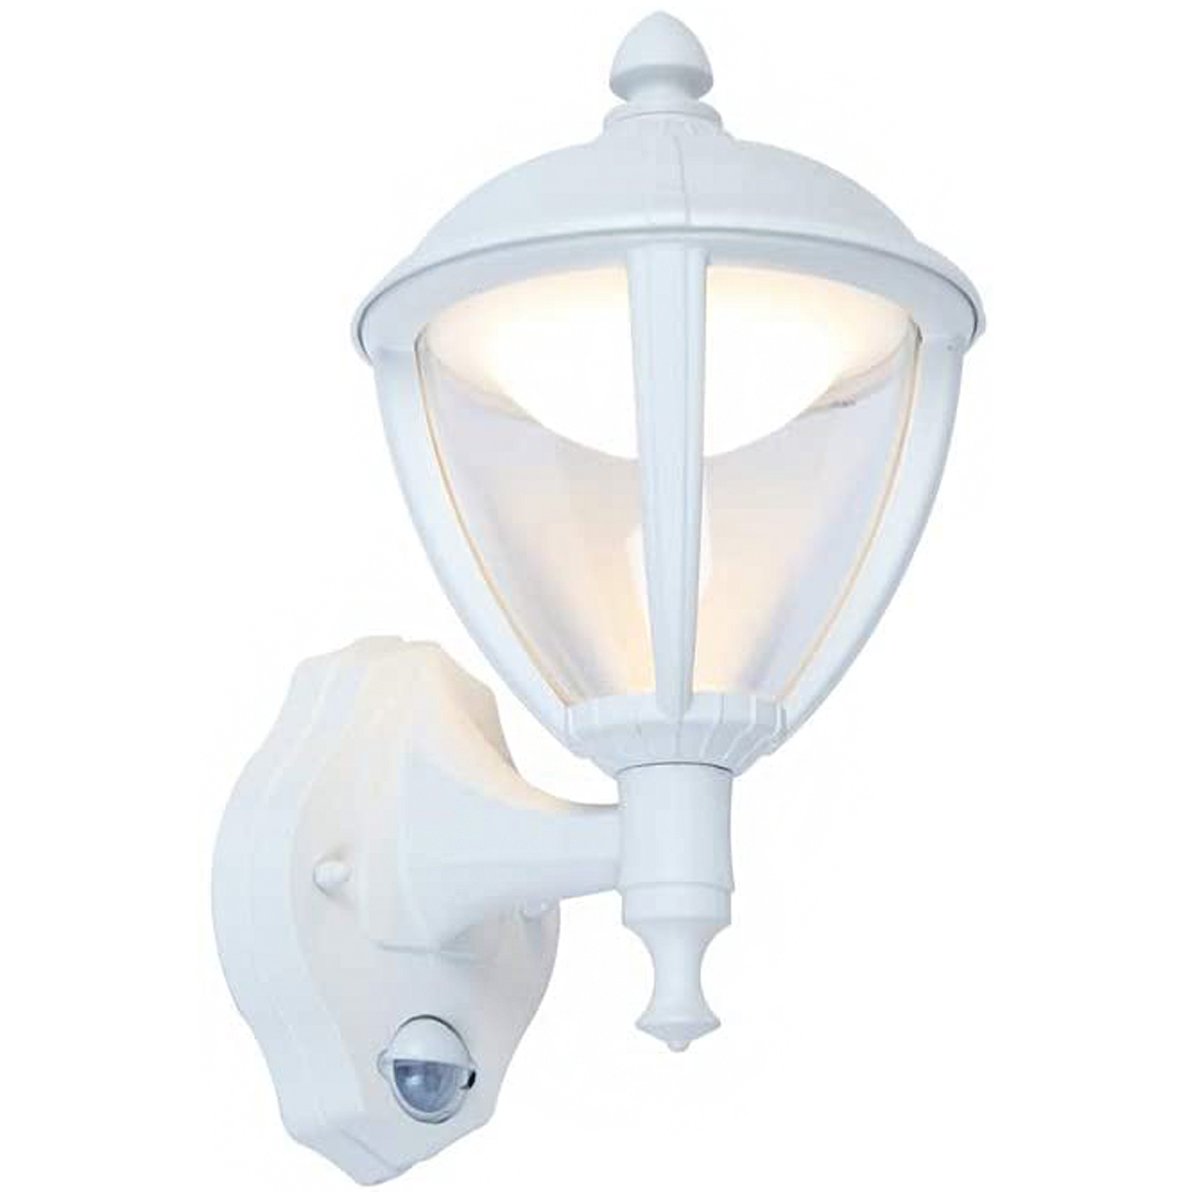 Our Cindy lantern wall light delivers on style and durability and is a smart choice for your exterior lighting. With its white aluminium construction teamed with clear panes, this lantern is hardwearing and rust and weatherproof. Built for life outdoors, it has an IP44 rating which means it can withstand the harshest of weather conditions. For sophisticated yet robust outdoor lighting, our Cindy white outdoor traditional lantern is a strong contender.